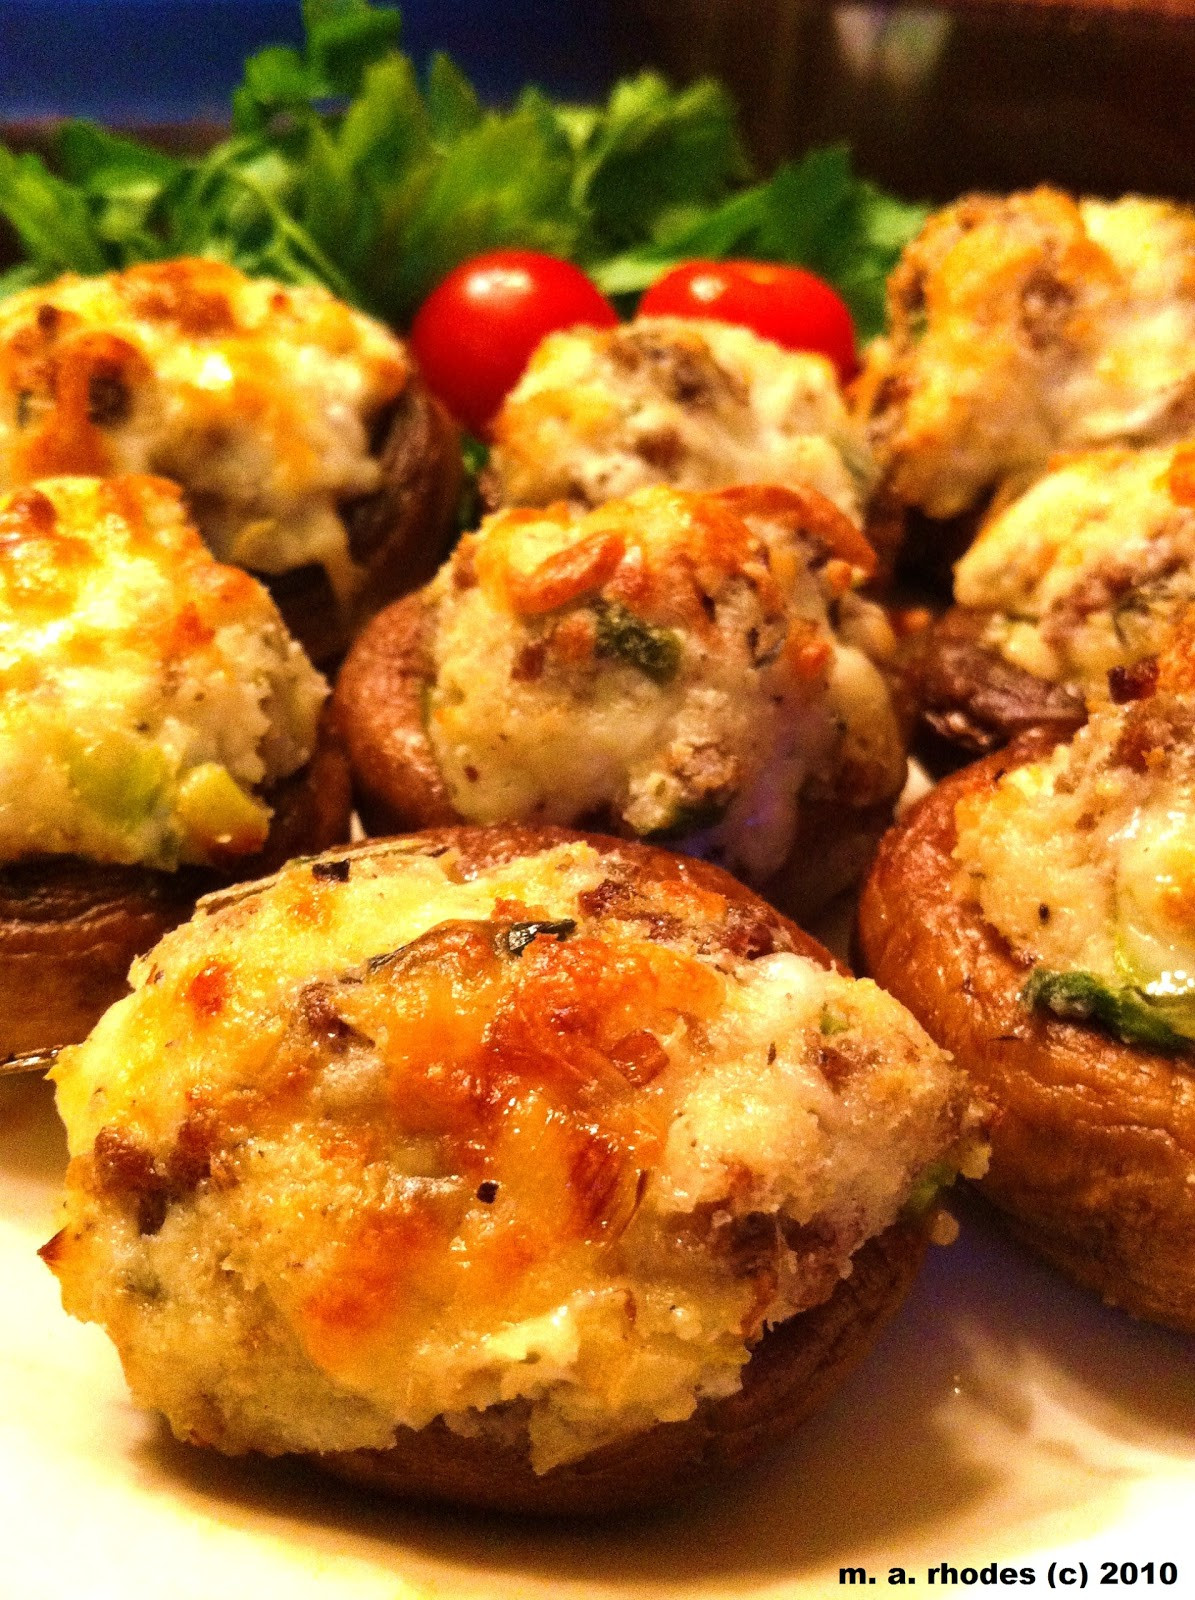 Cooking Stuffed Mushrooms Awesome Cooking the Amazing Stuffed Mushrooms